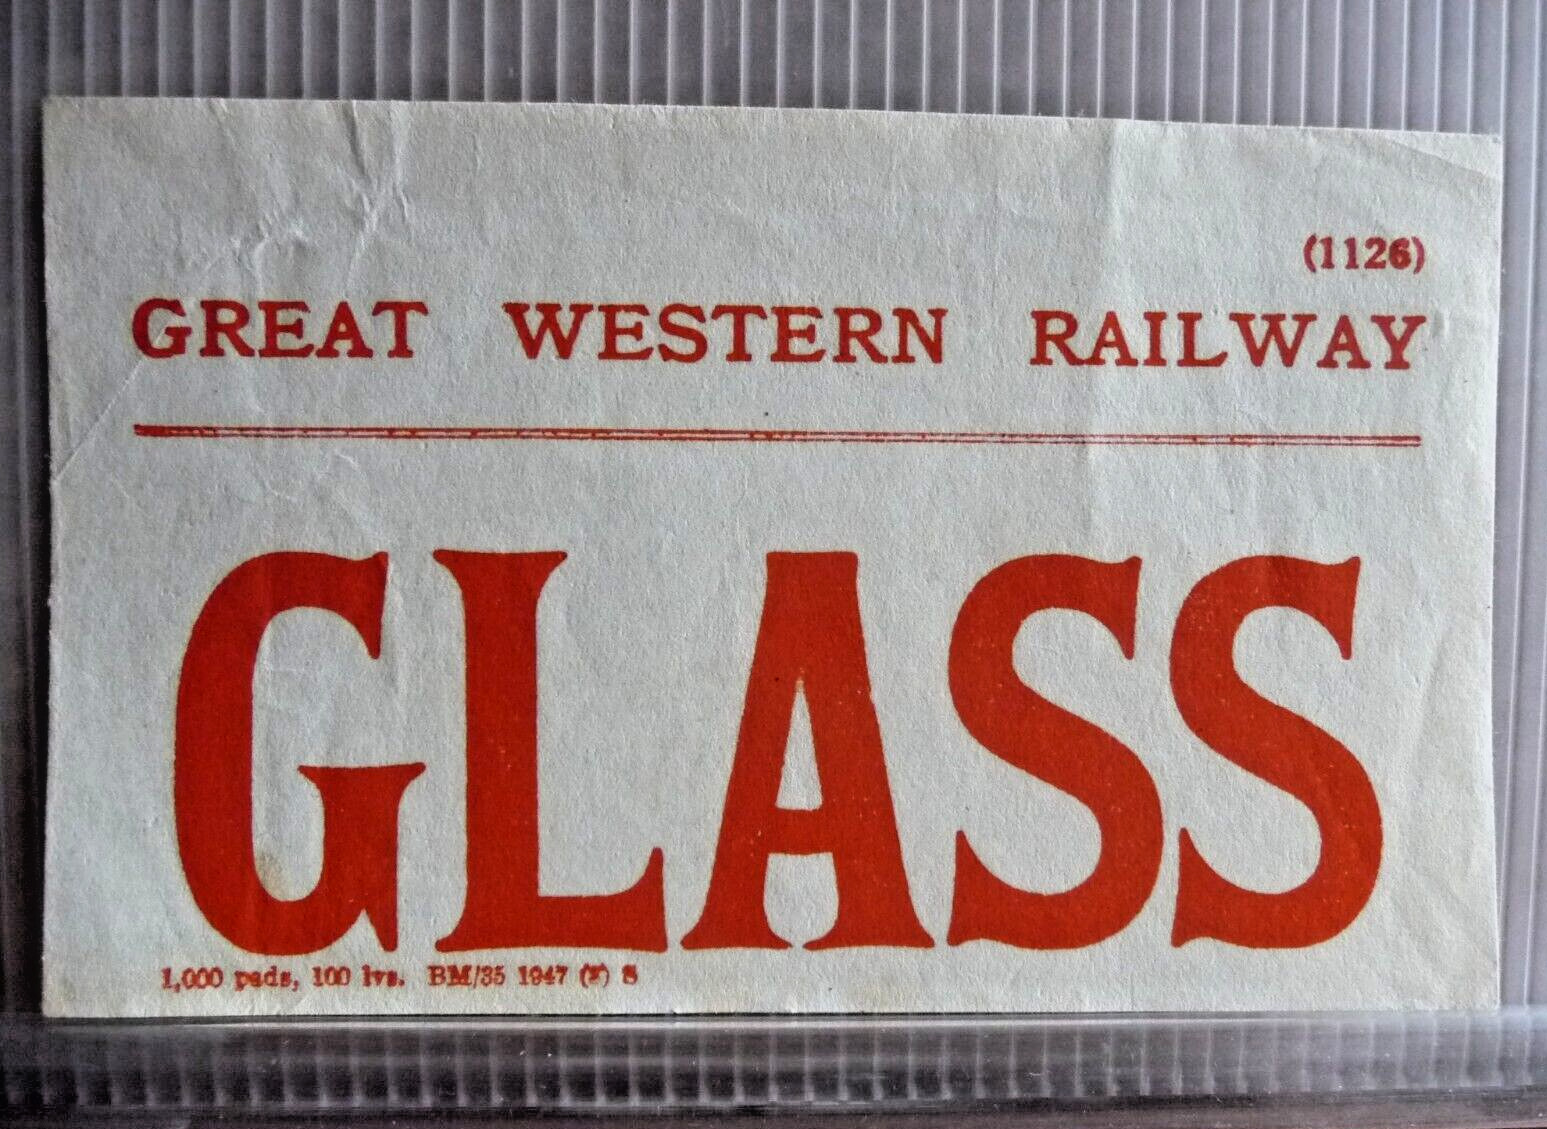 EA13 - 090 - GWR - Goods Label - Glass - 1947